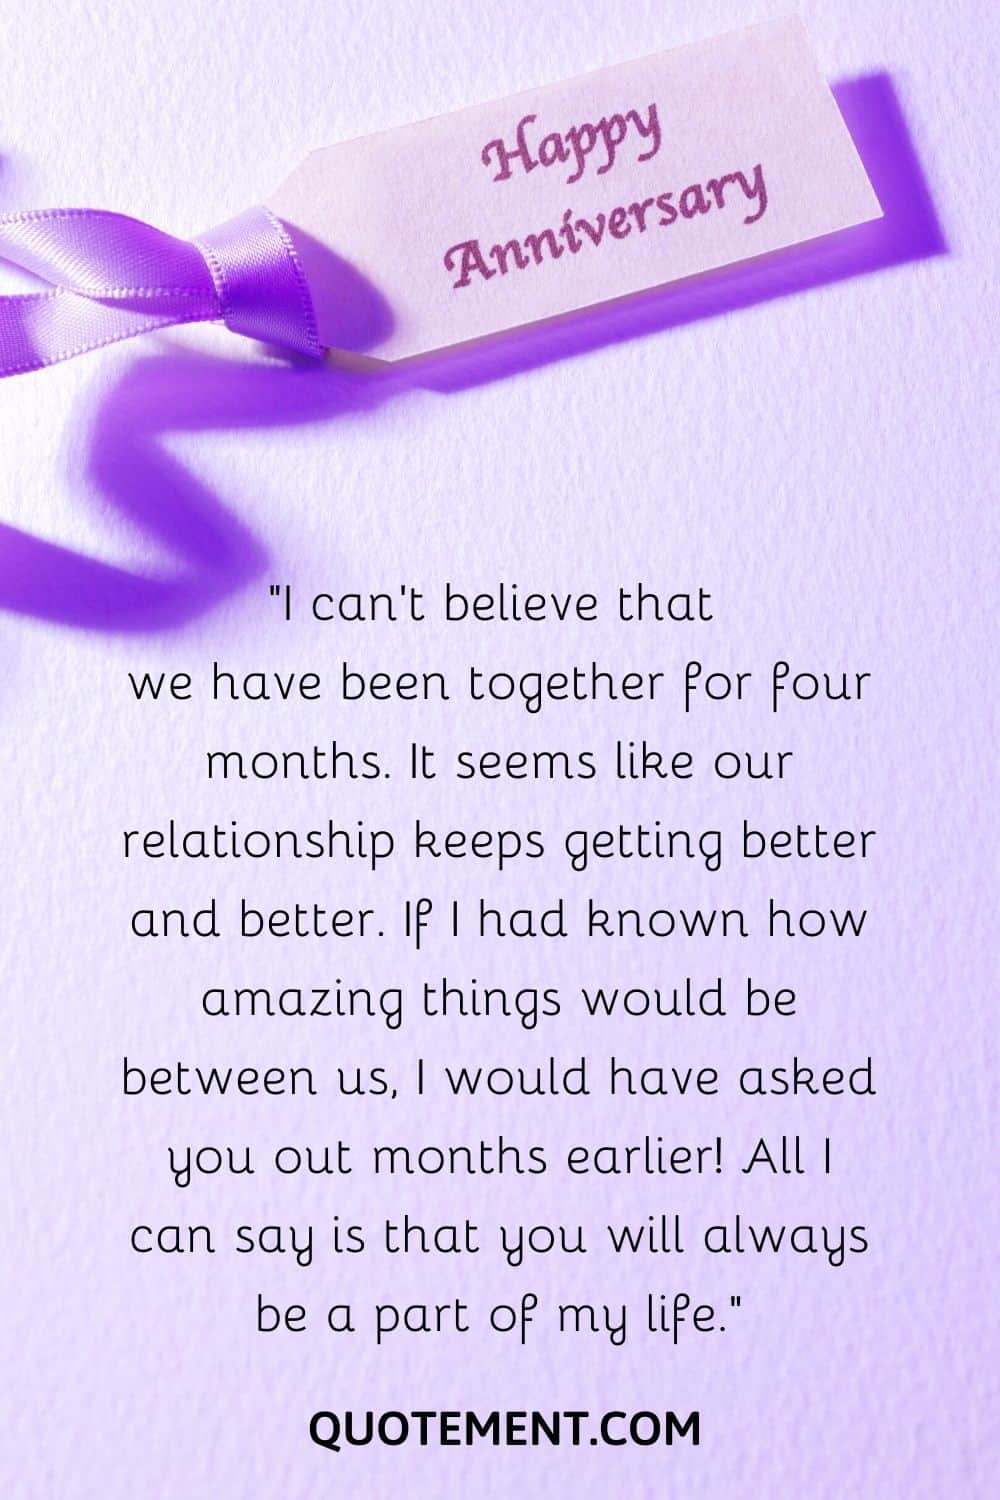 “I can’t believe that we have been together for four months.